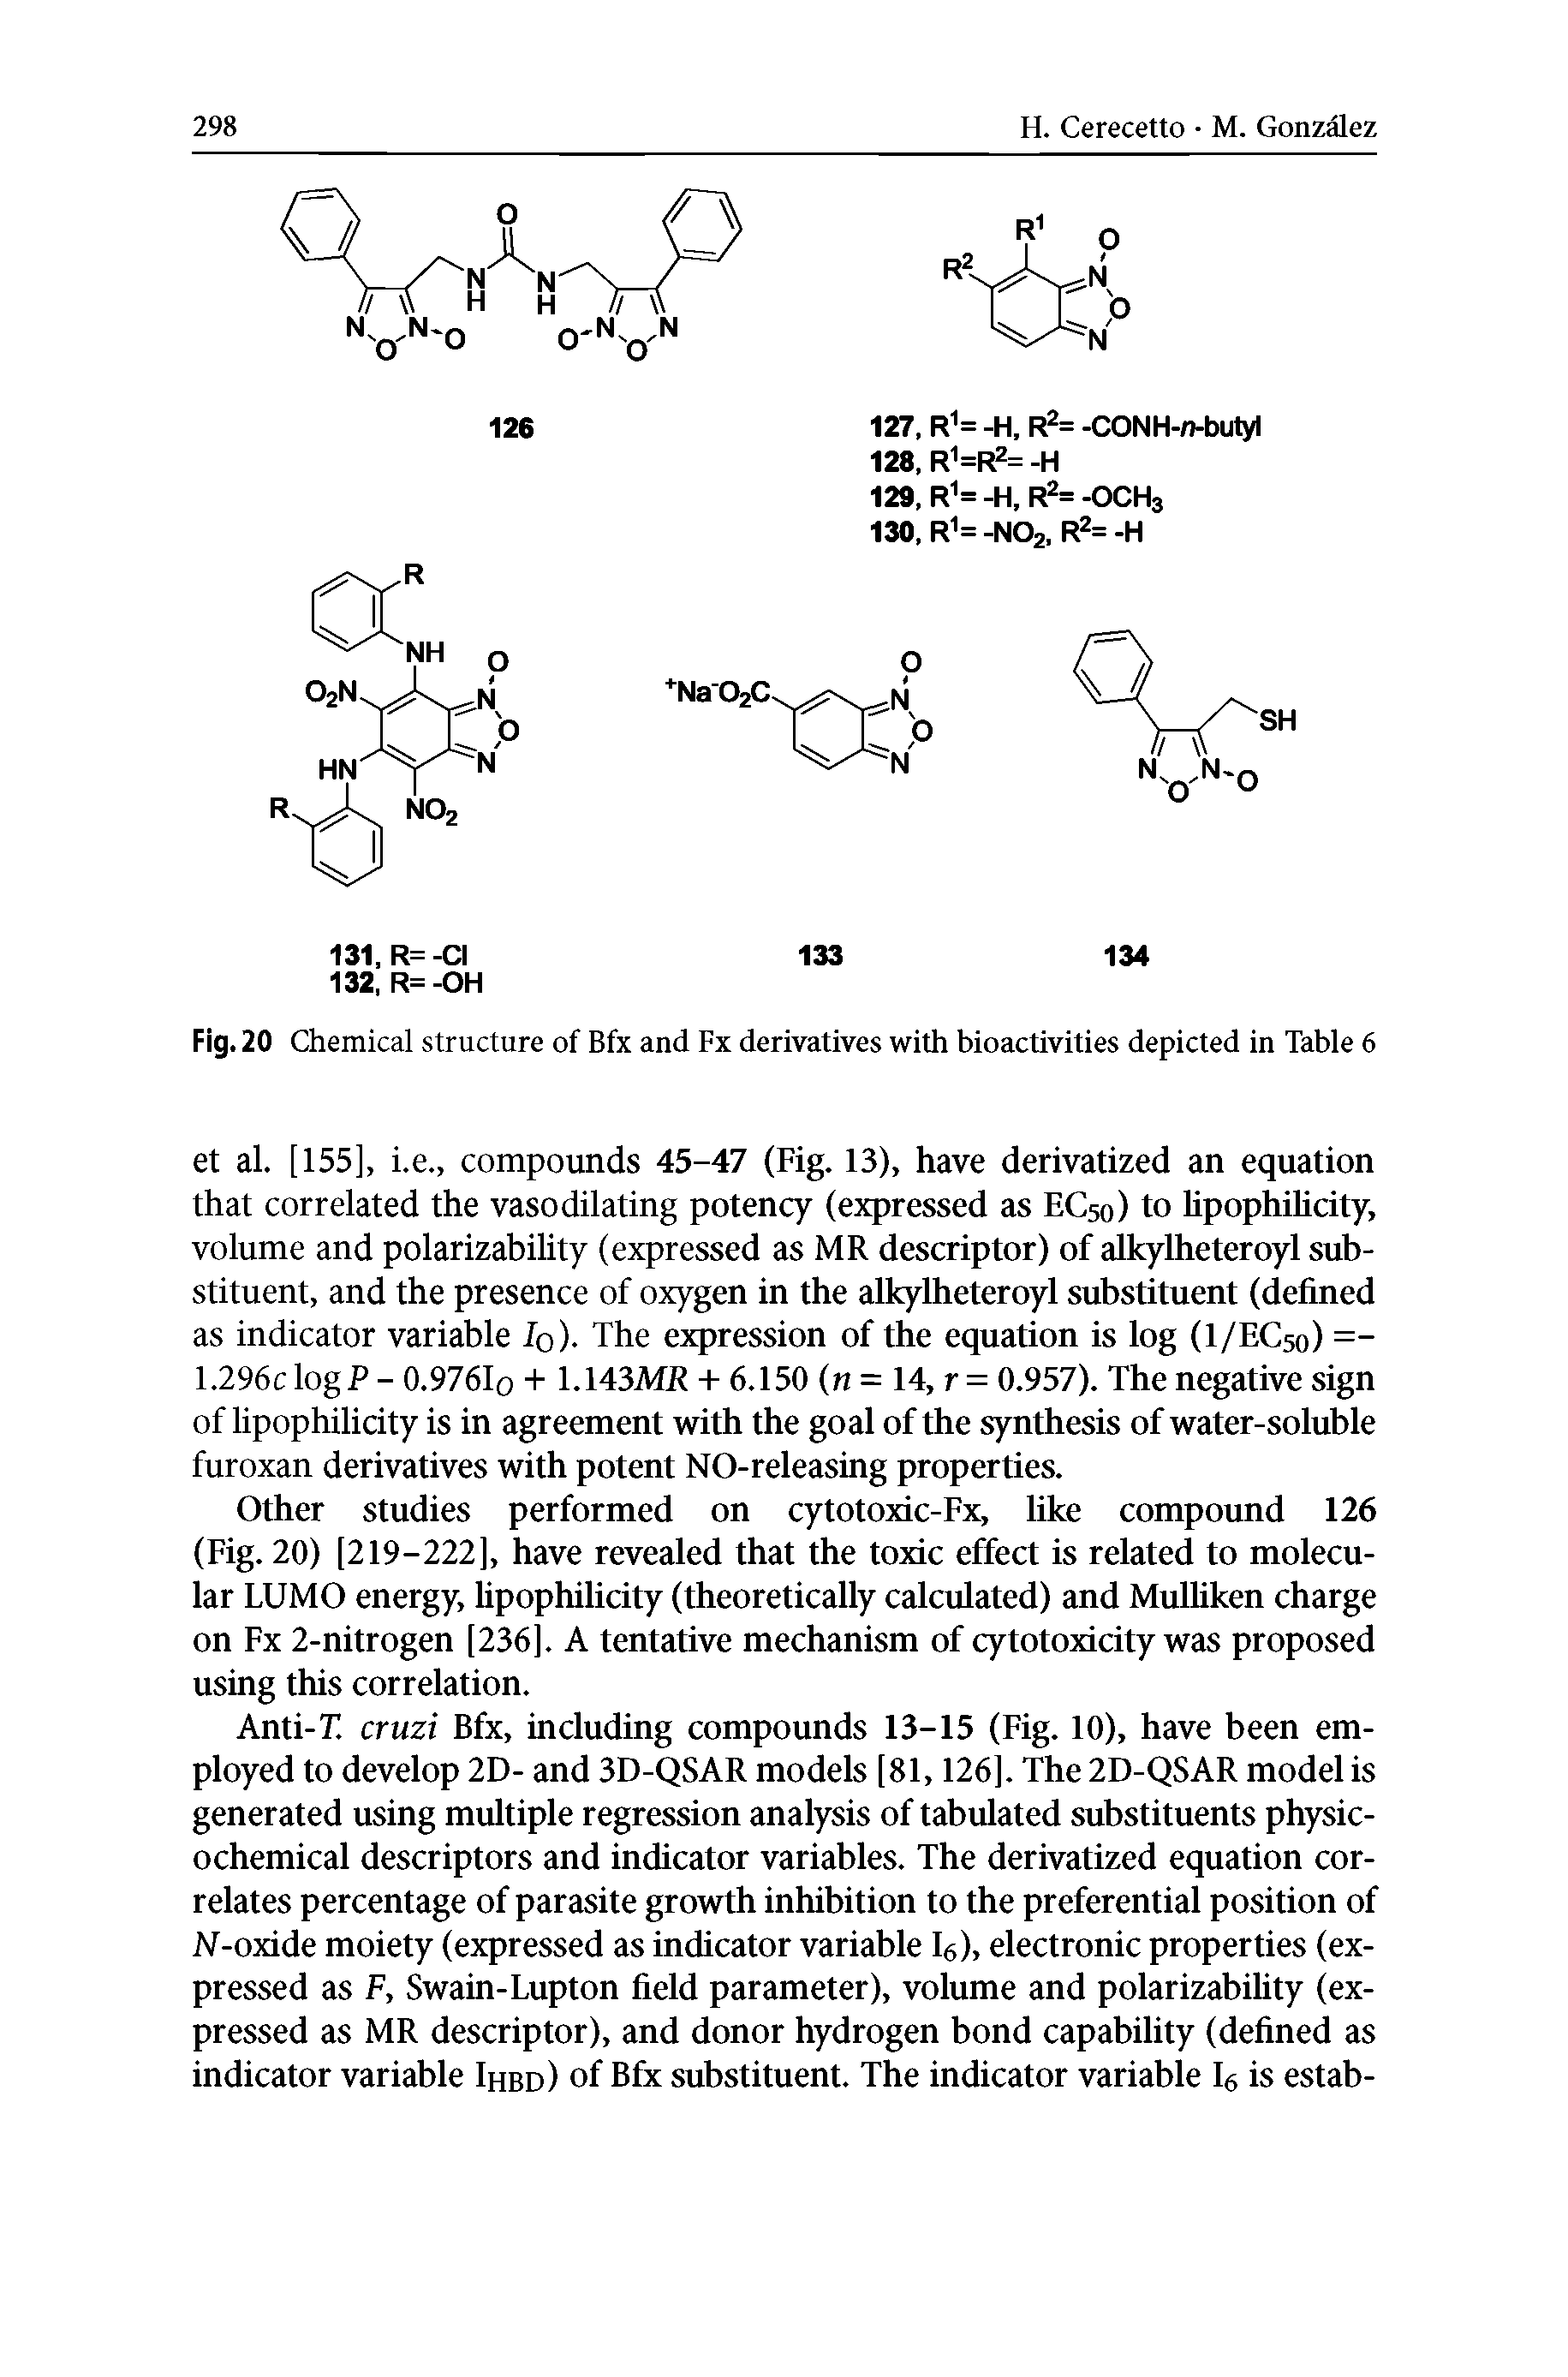 Fig. 20 Chemical structure of Bfx and Fx derivatives with bioactivities depicted in Table 6...